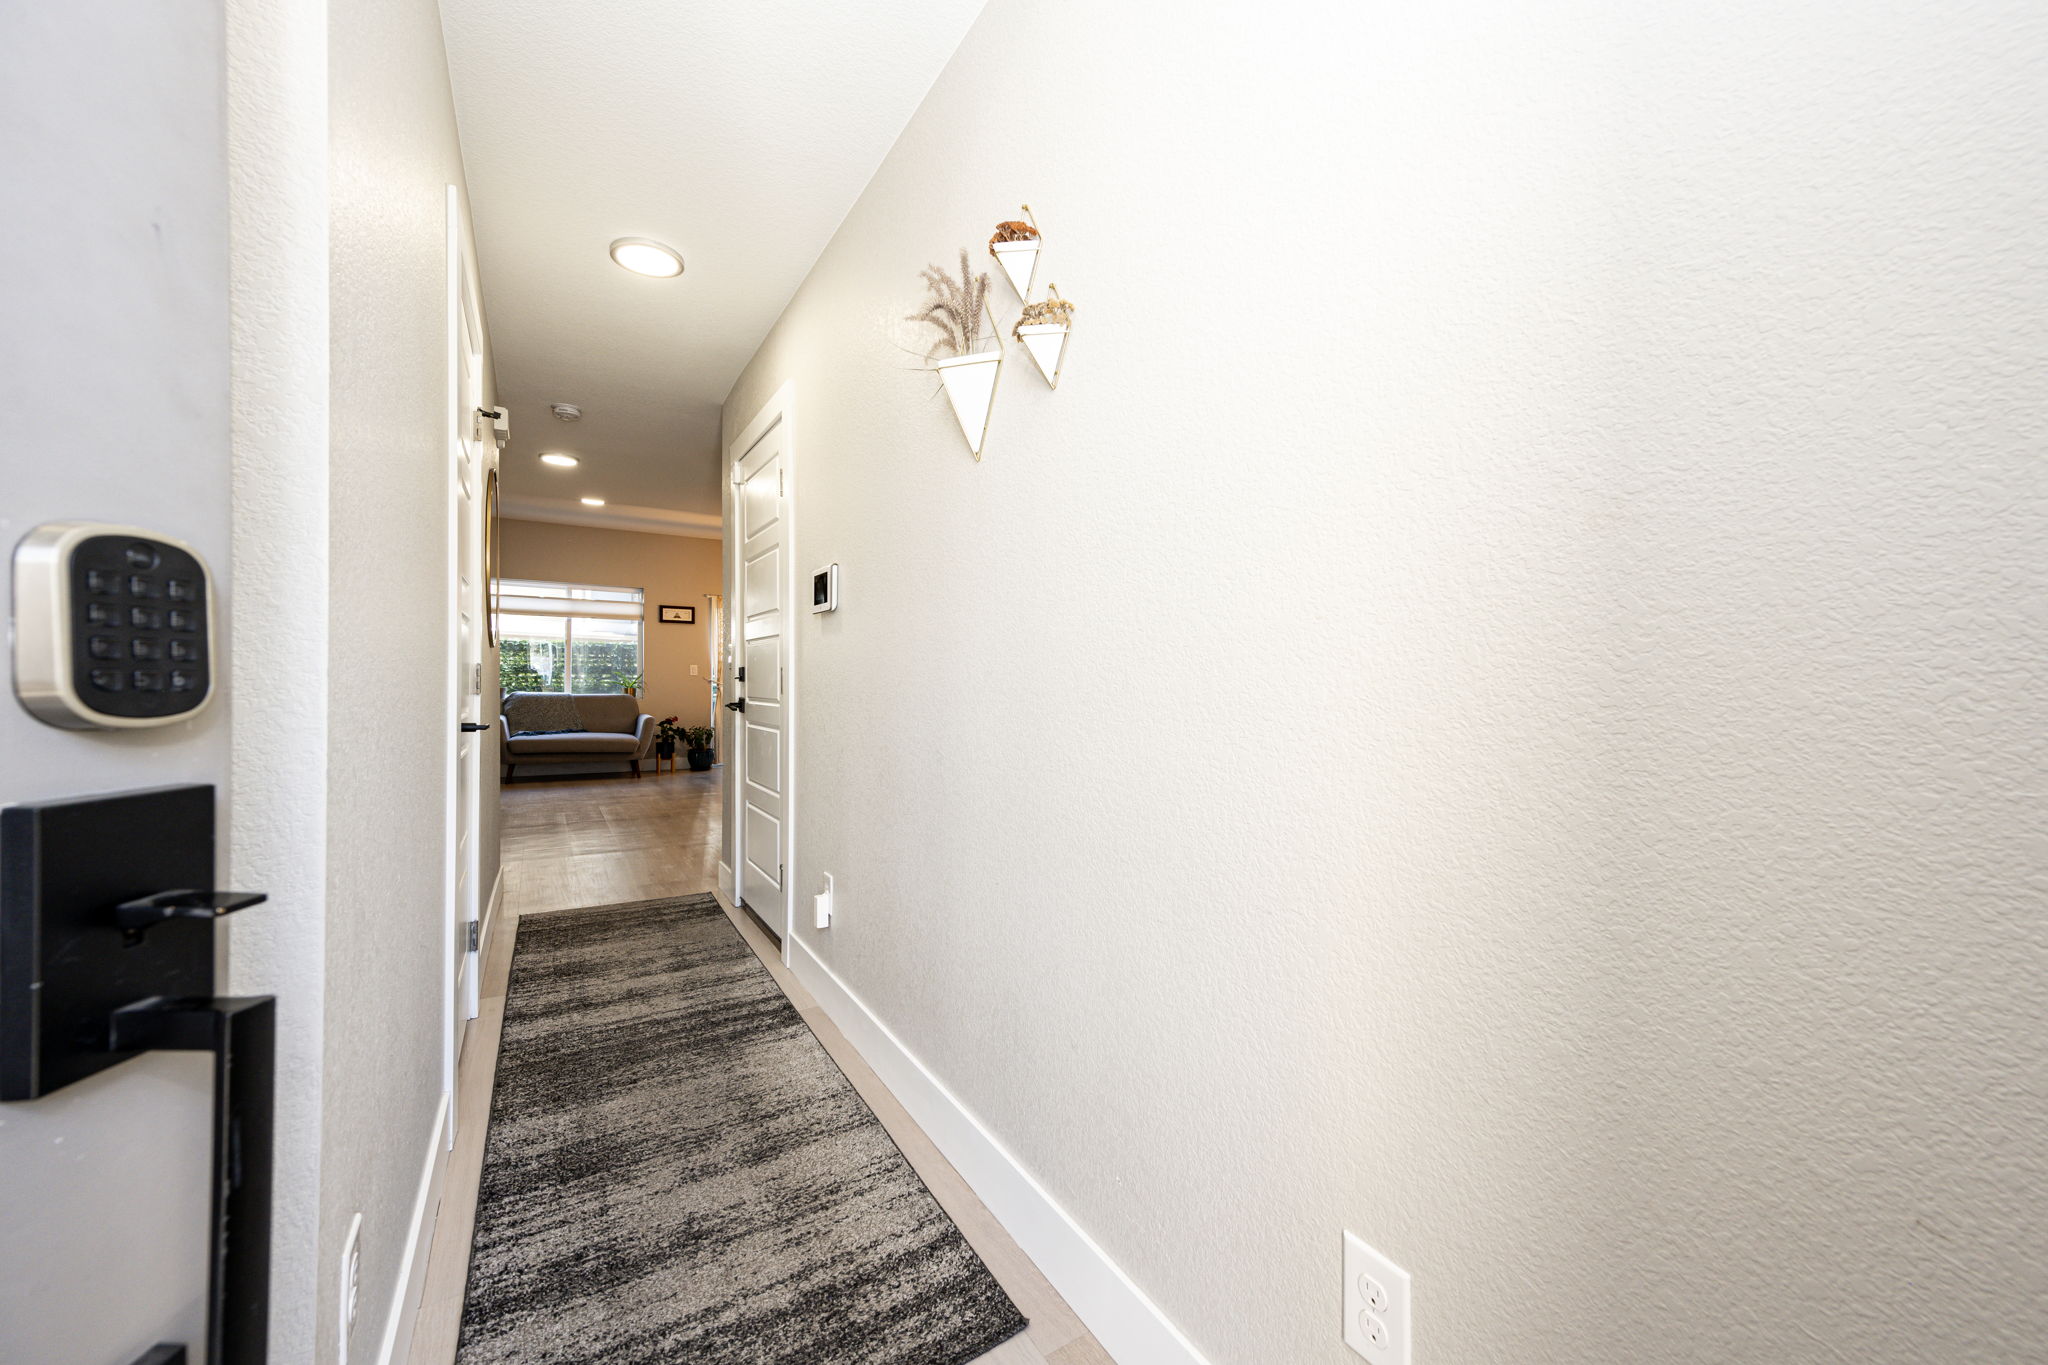 View as you enter the home. The half bathroom is located down the hallway to the left. Garage door entrance is down the hallway to the right.